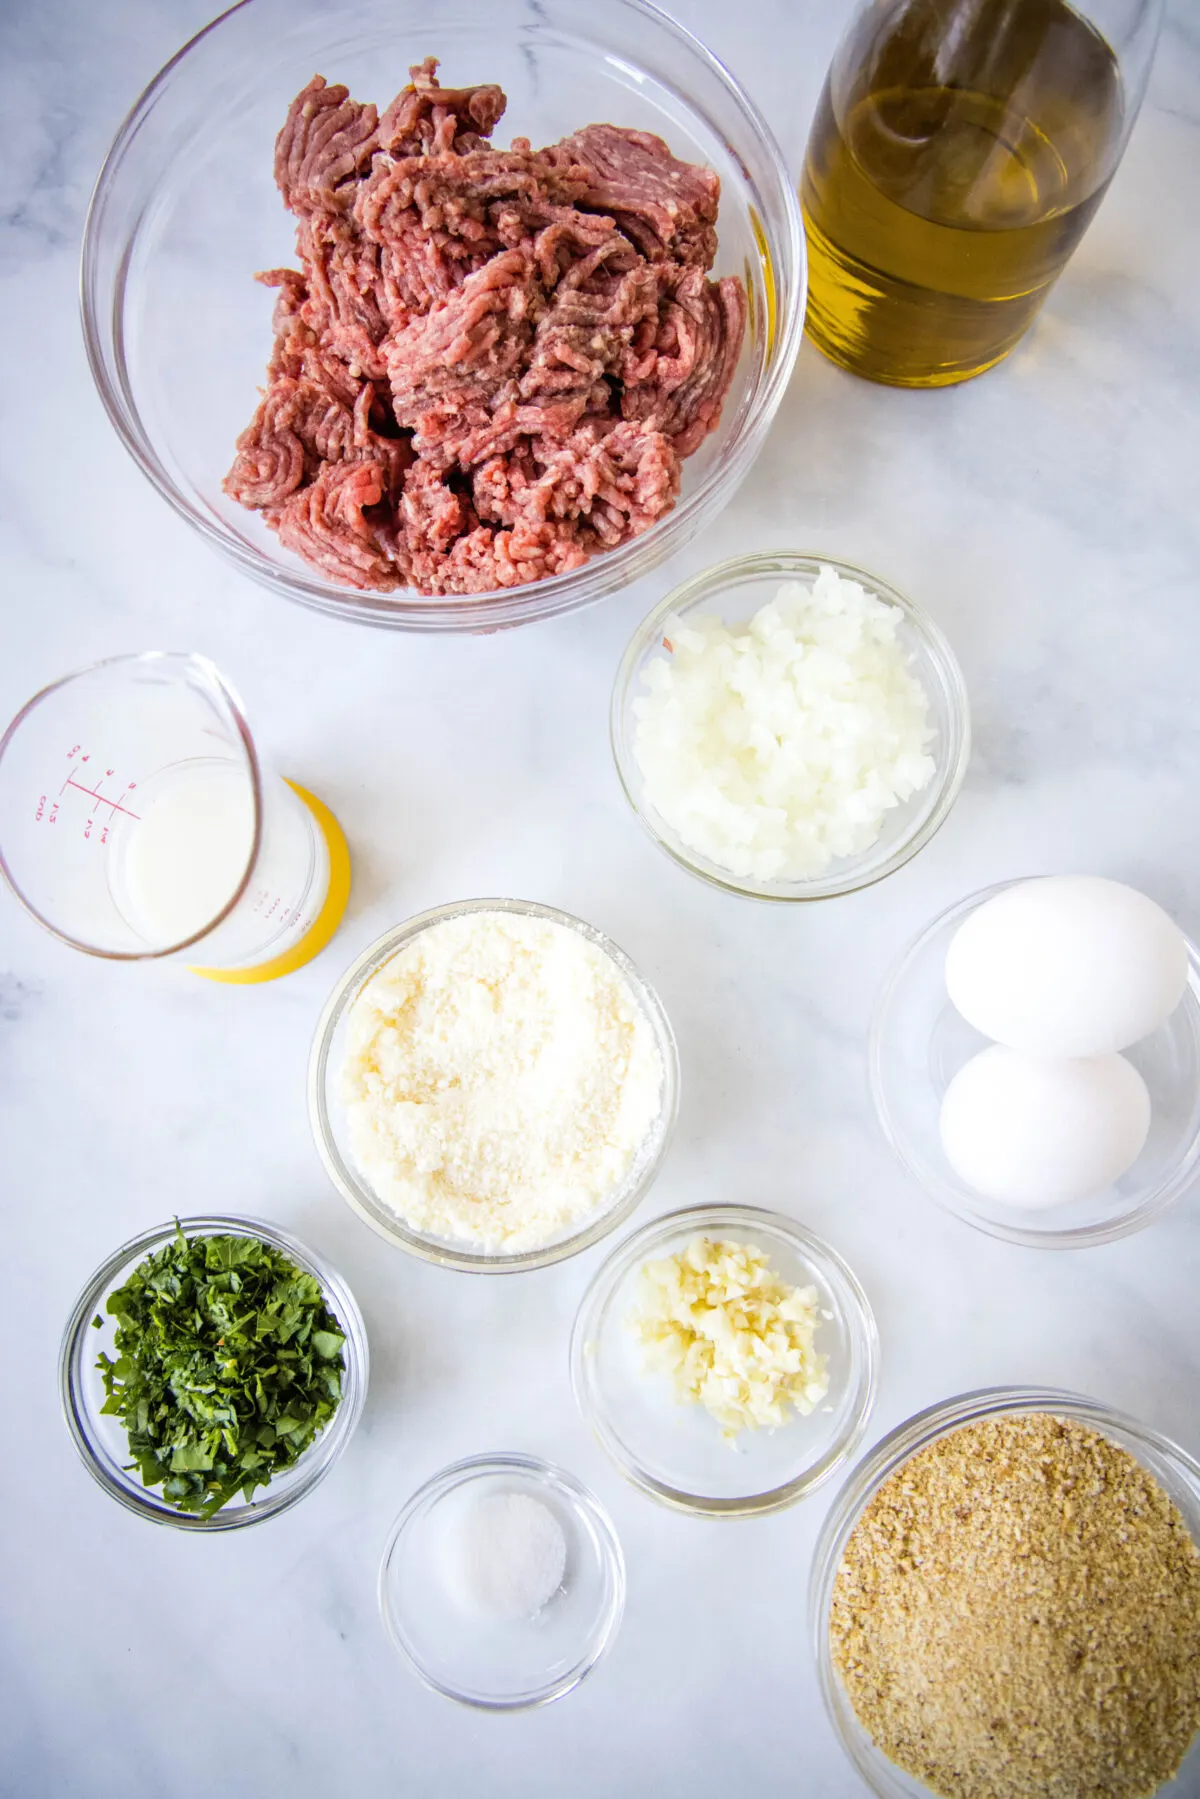 Overhead view of the ingredients needed for air fryer meatballs: a bowl of ground beef, a bowl of onions, a bowl of garlic, a bowl of parsley, a bowl of breadcrumbs, a glass of milk, a bottle of olive oil, a bowl of parmesan cheese, a bowl of salt, and some eggs.